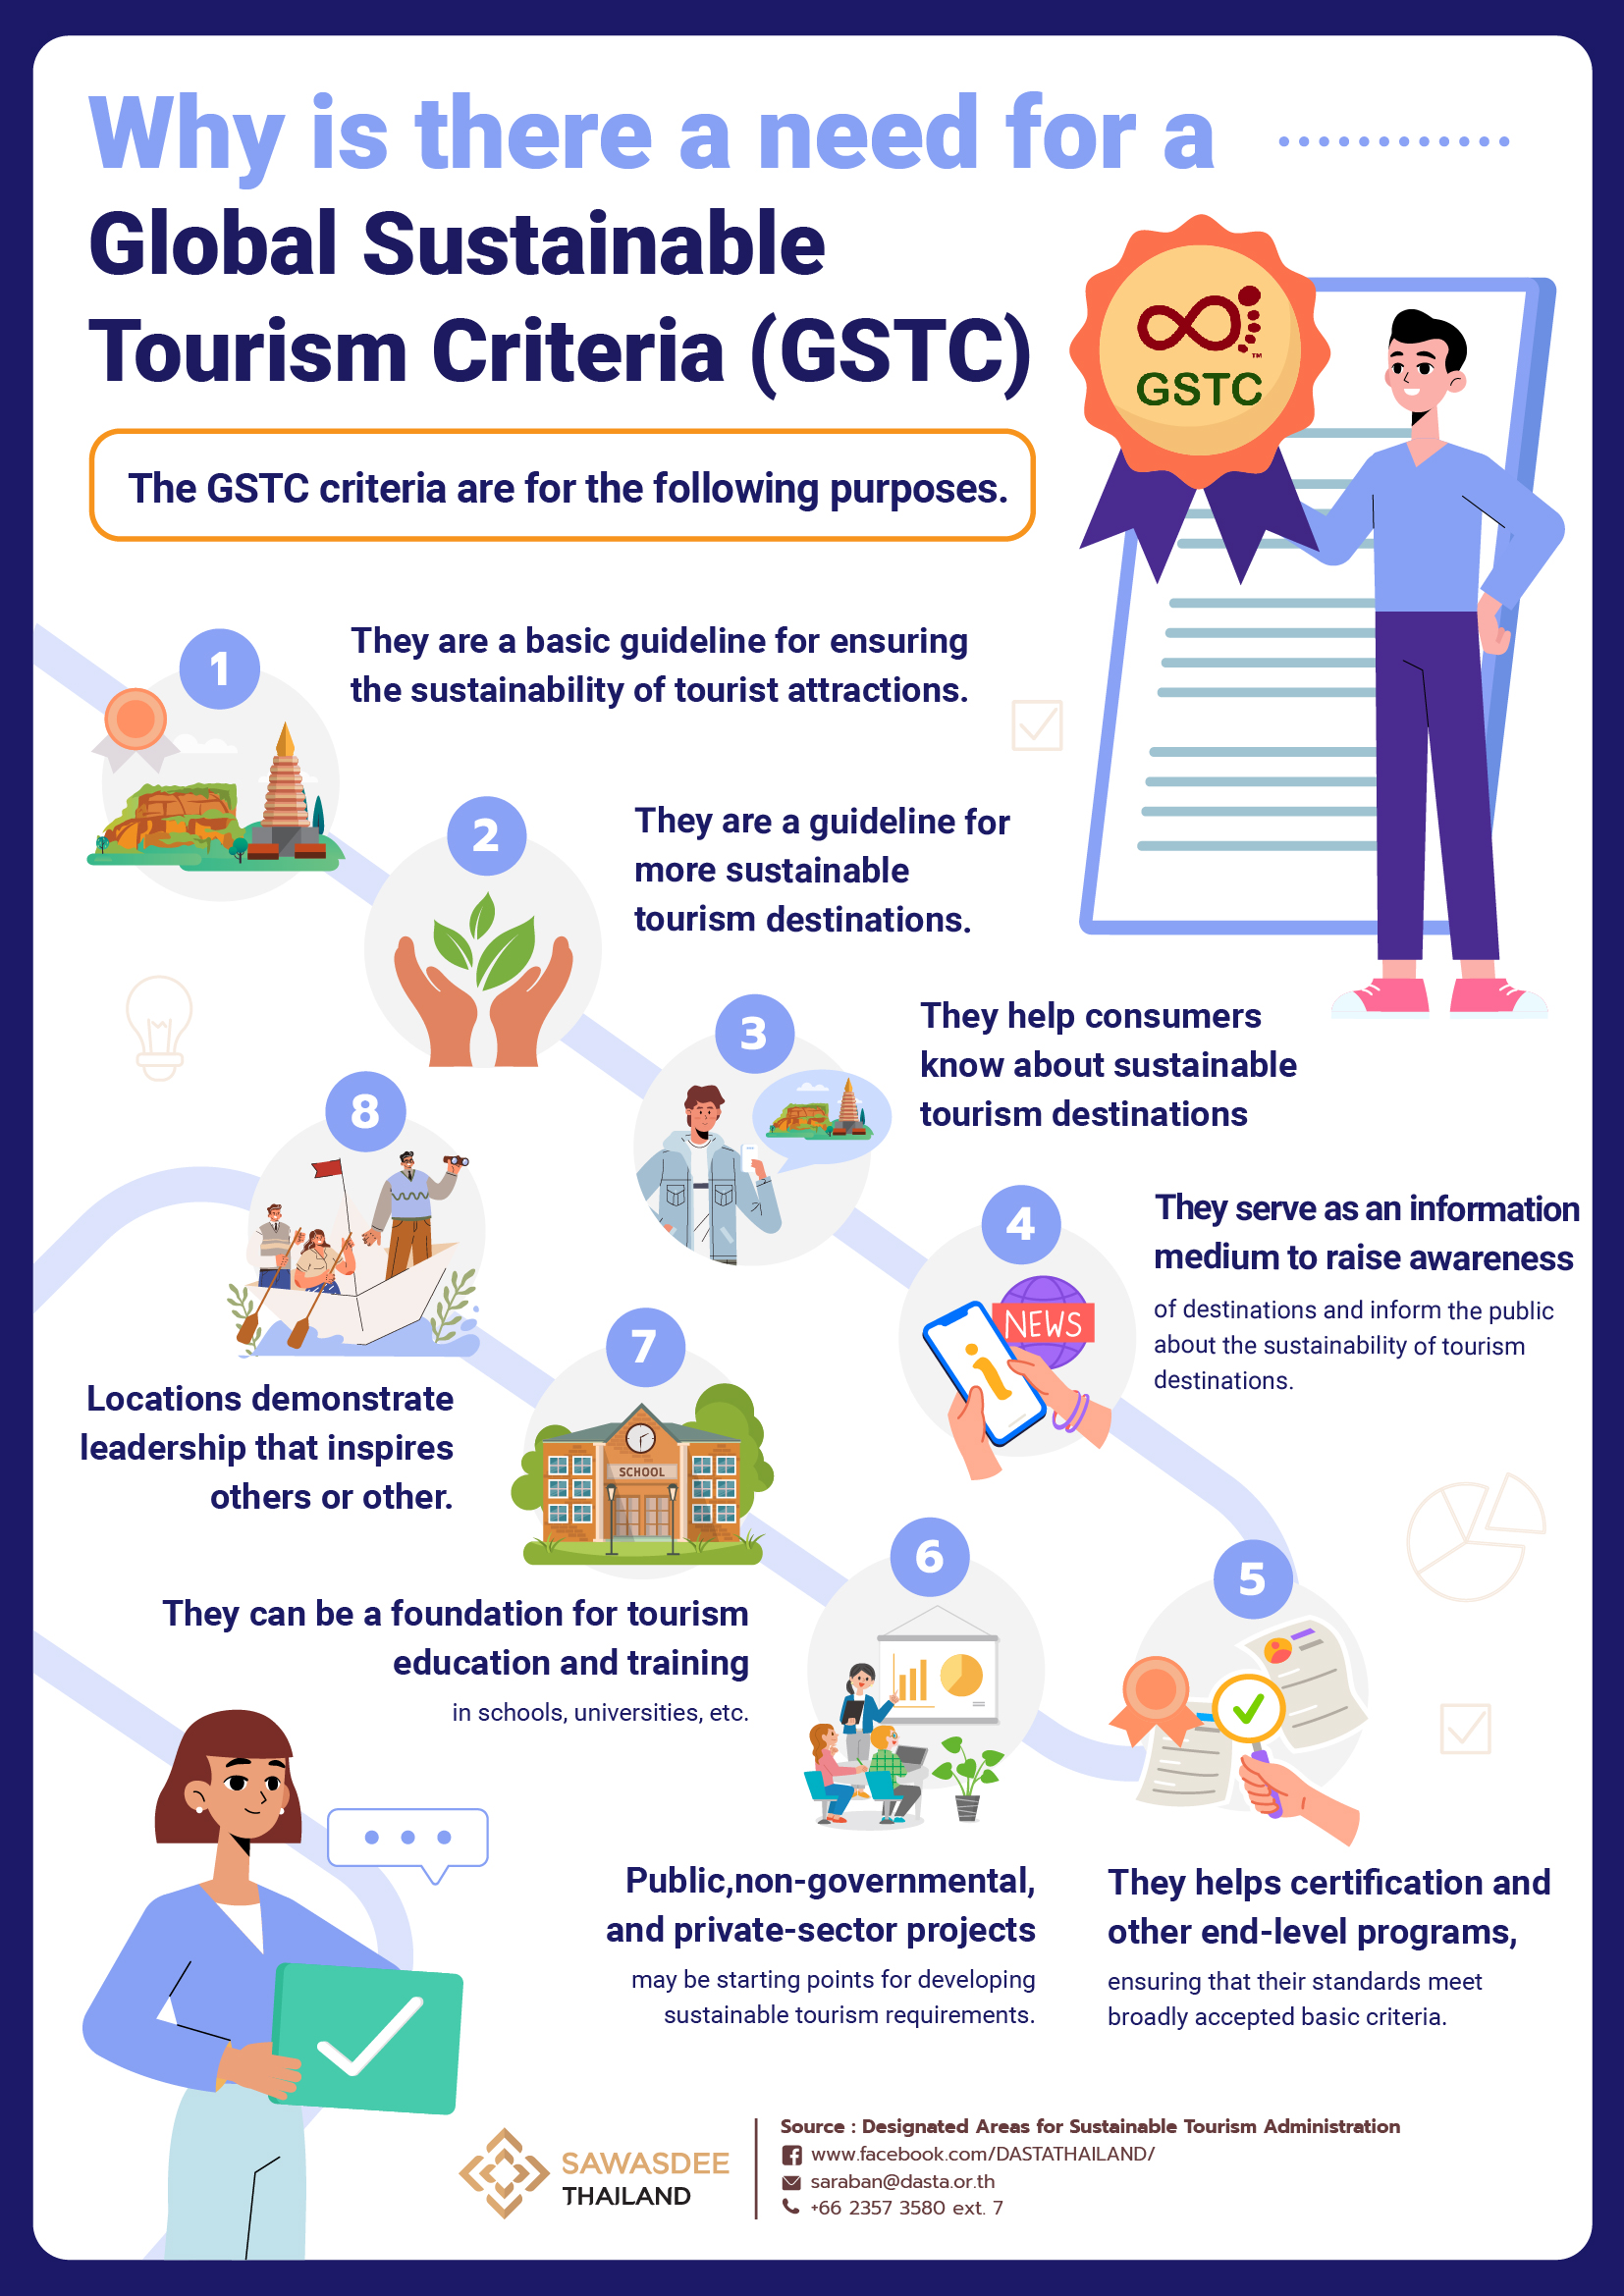 global sustainable tourism criteria (gstc)